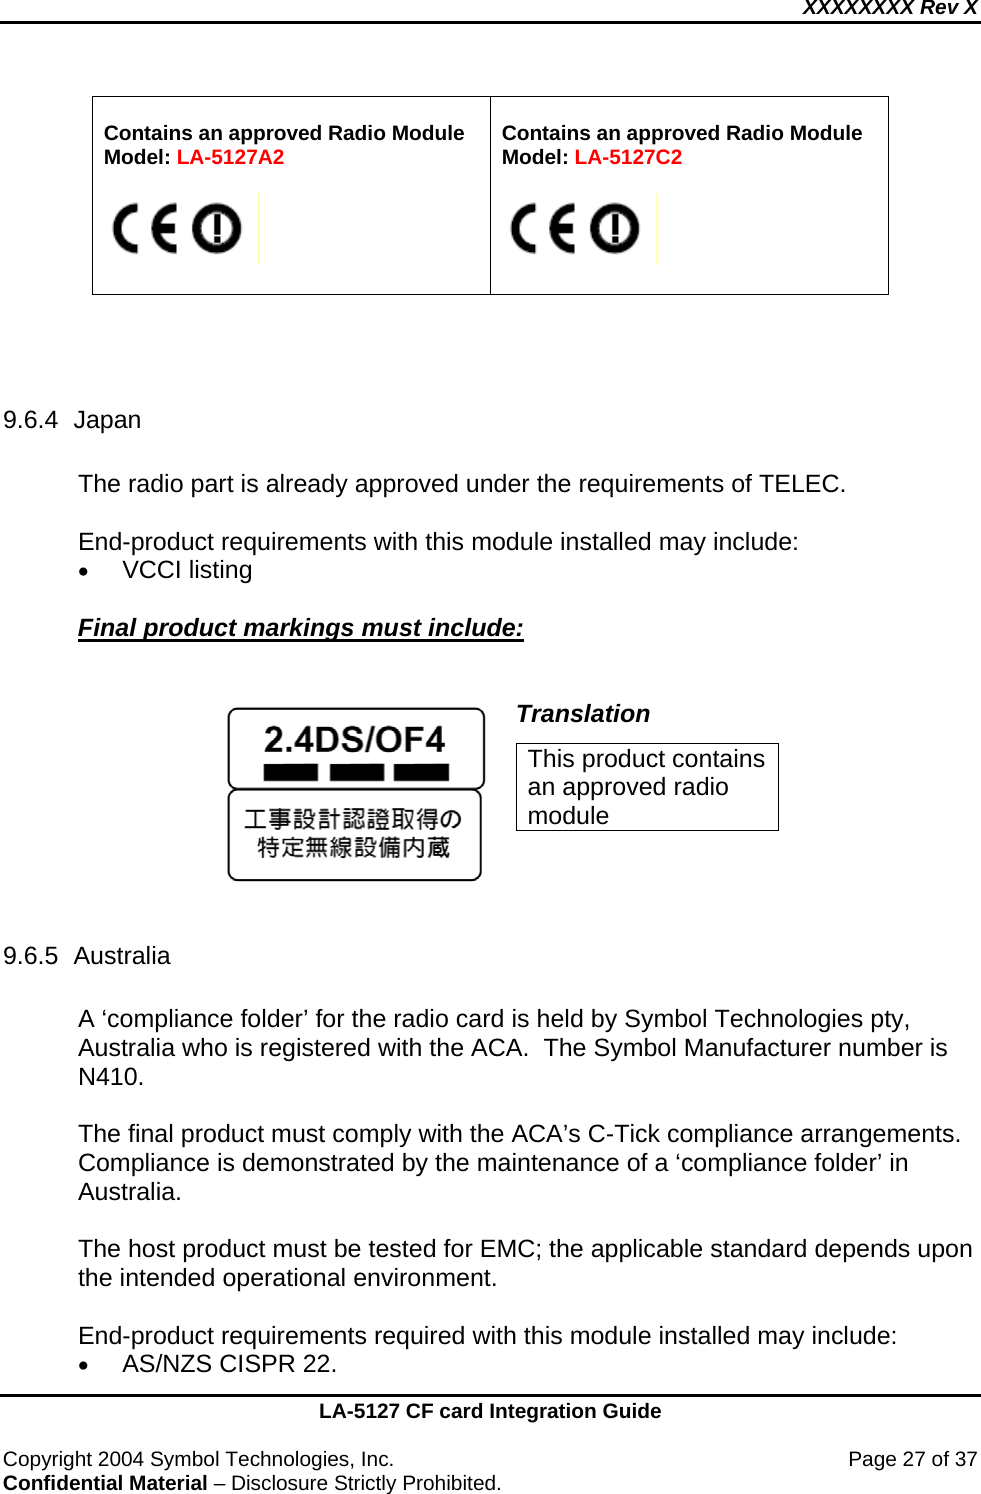 XXXXXXXX Rev X    LA-5127 CF card Integration Guide  Copyright 2004 Symbol Technologies, Inc.    Page 27 of 37 Confidential Material – Disclosure Strictly Prohibited.  Contains an approved Radio Module Model: LA-5127A2     Contains an approved Radio Module Model: LA-5127C2      9.6.4 Japan  The radio part is already approved under the requirements of TELEC.  End-product requirements with this module installed may include: • VCCI listing  Final product markings must include:    Translation This product contains an approved radio module  9.6.5 Australia  A ‘compliance folder’ for the radio card is held by Symbol Technologies pty, Australia who is registered with the ACA.  The Symbol Manufacturer number is  N410.  The final product must comply with the ACA’s C-Tick compliance arrangements. Compliance is demonstrated by the maintenance of a ‘compliance folder’ in Australia.  The host product must be tested for EMC; the applicable standard depends upon the intended operational environment.   End-product requirements required with this module installed may include: • AS/NZS CISPR 22. 